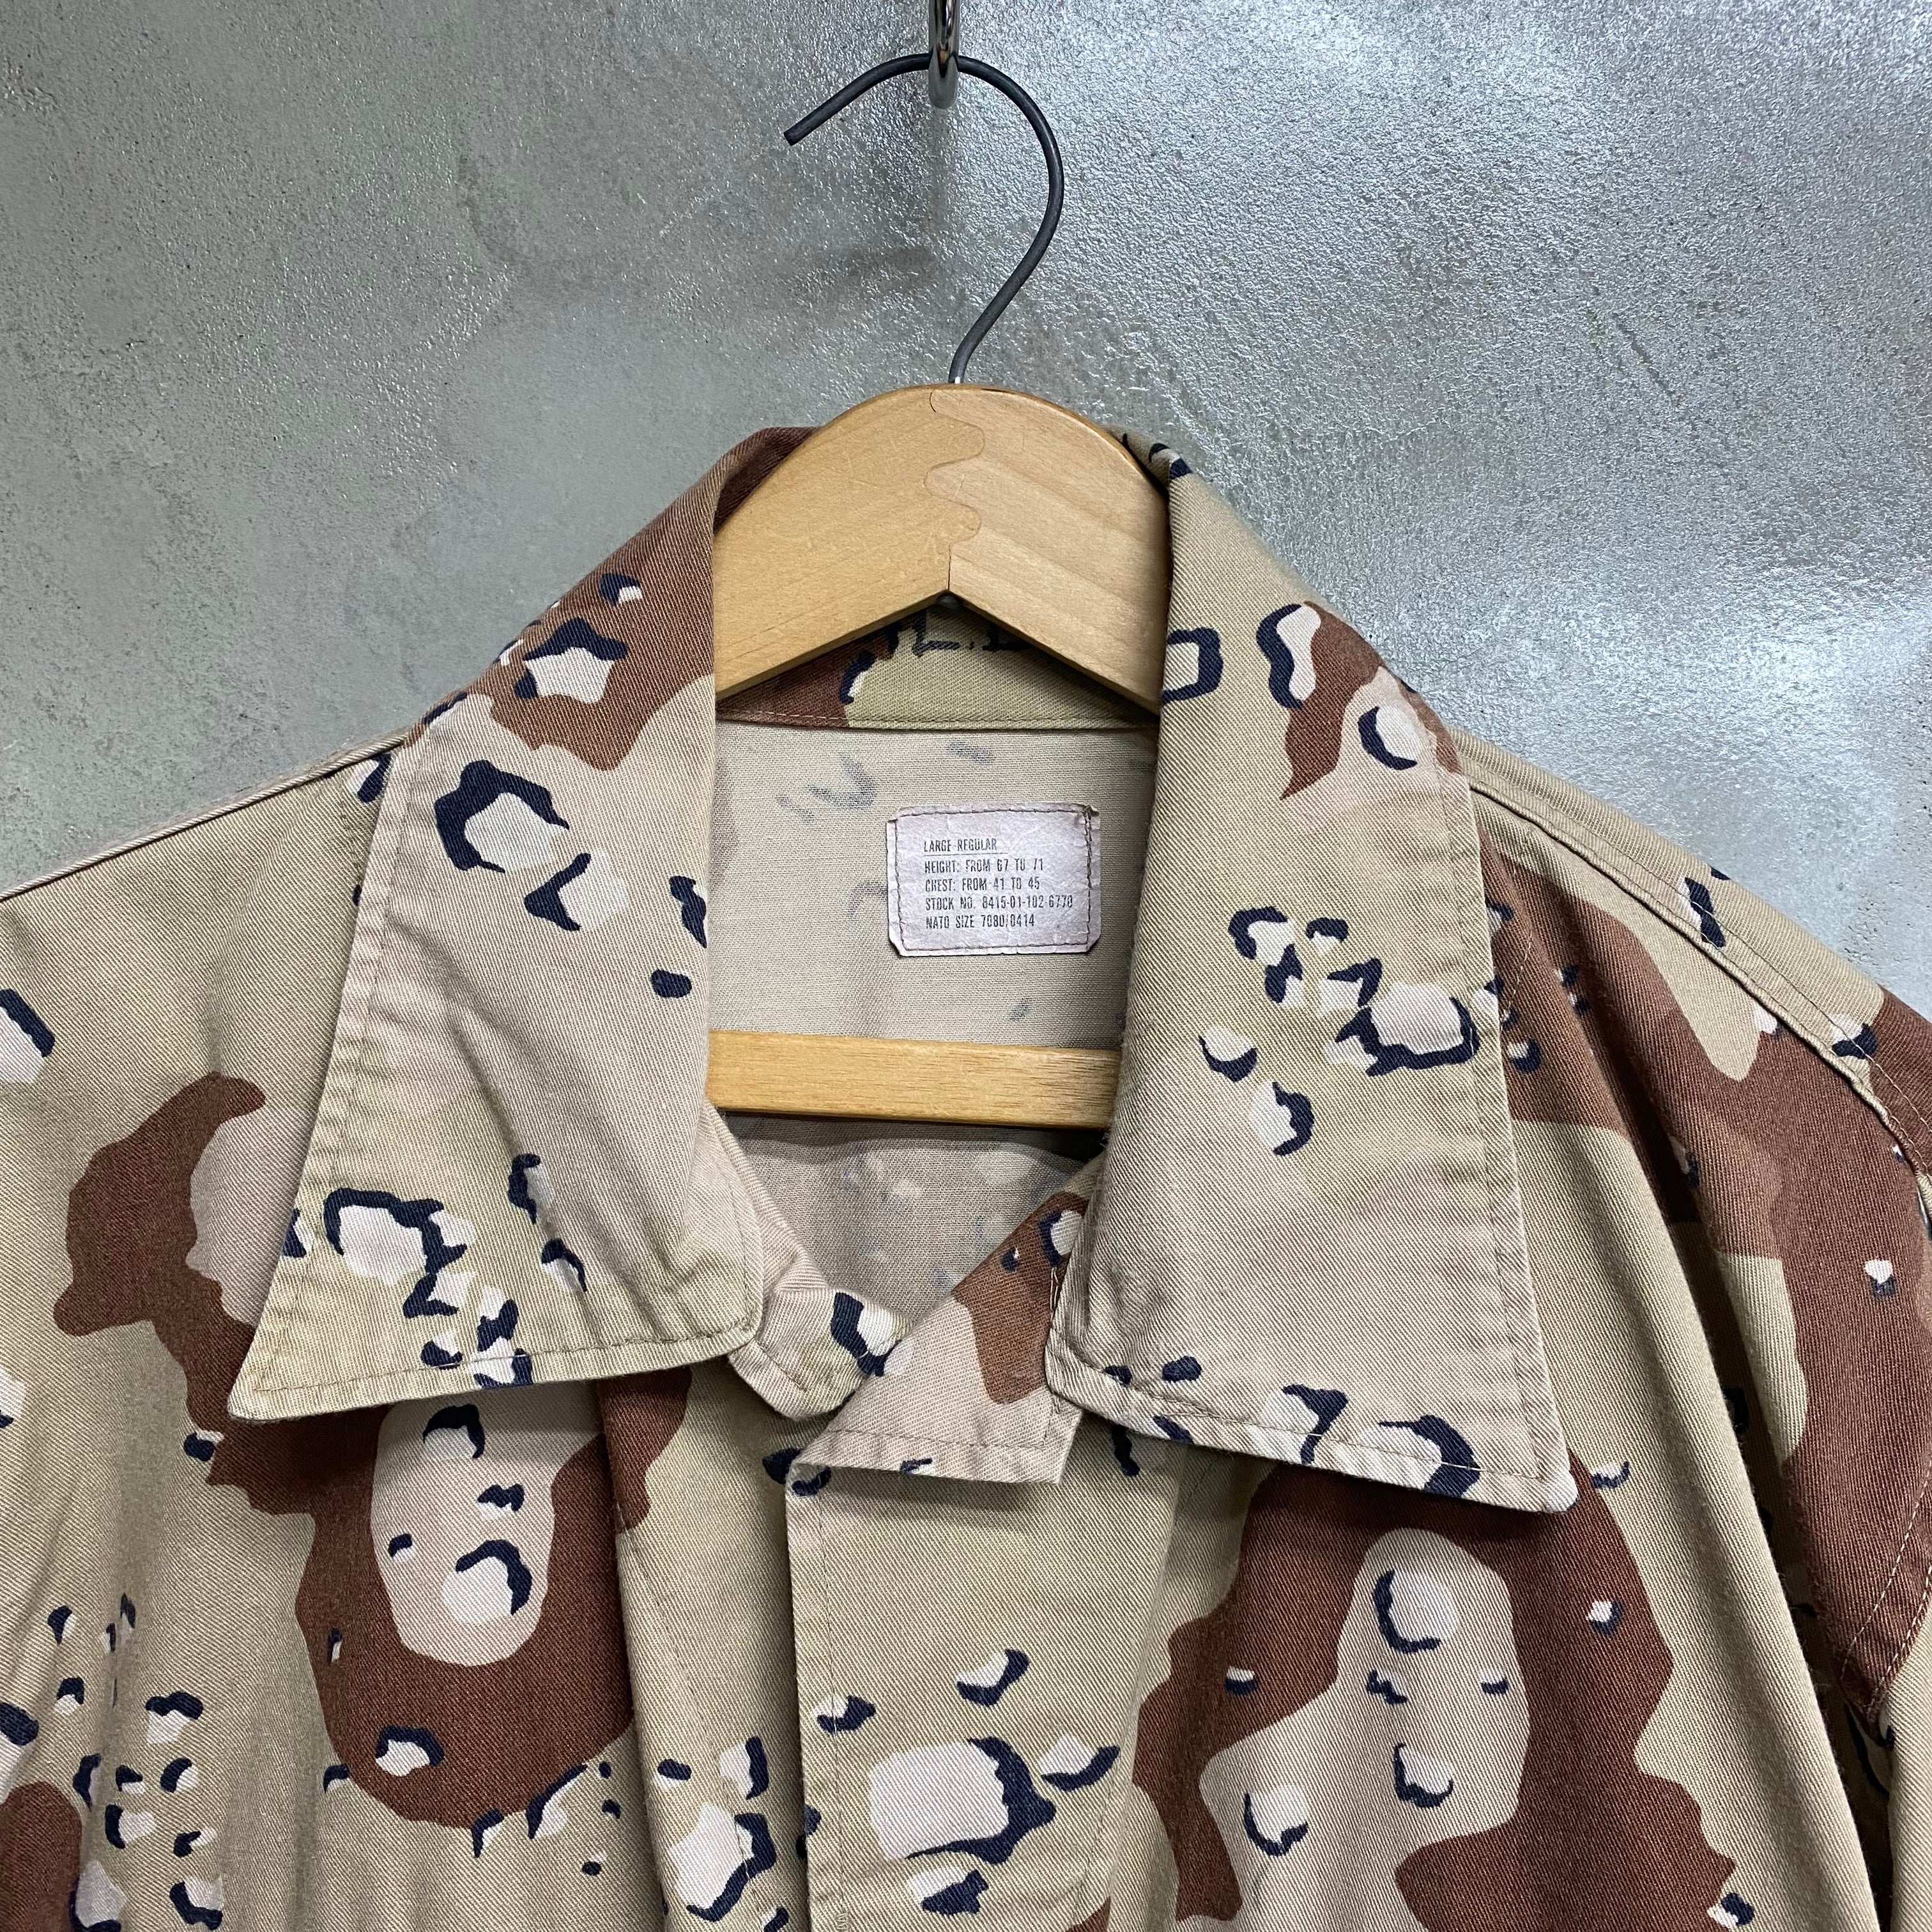 [ ONLY ONE ! ] U.S. 6COLOR DESERT BDU JACKET / Mr.Clean Select